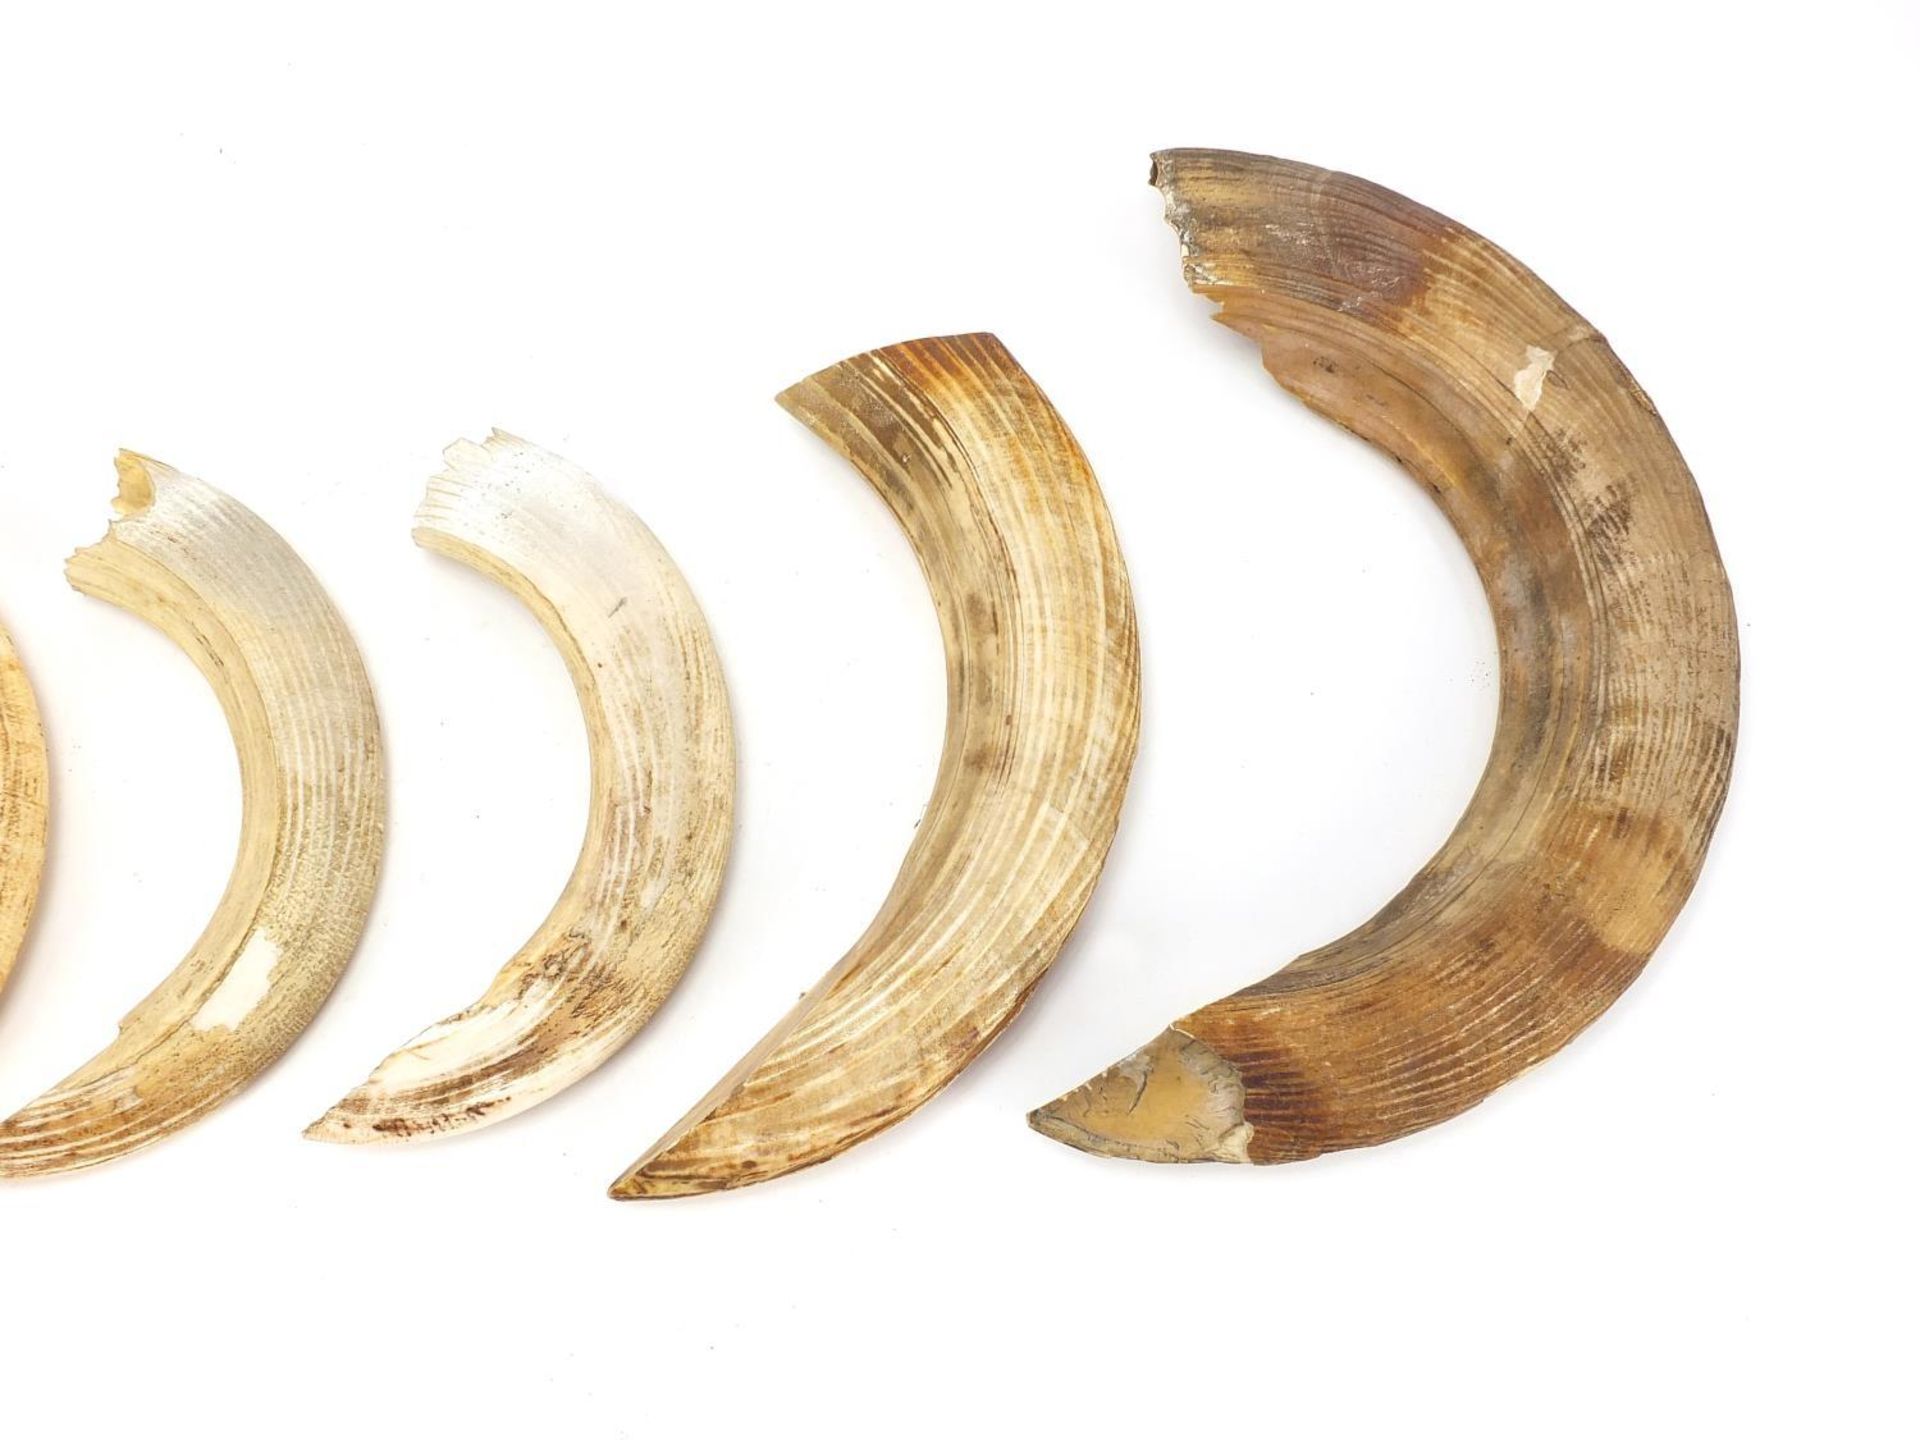 Six hippopotamus ivory teeth, the largest 33.5cm in length : - Image 6 of 6